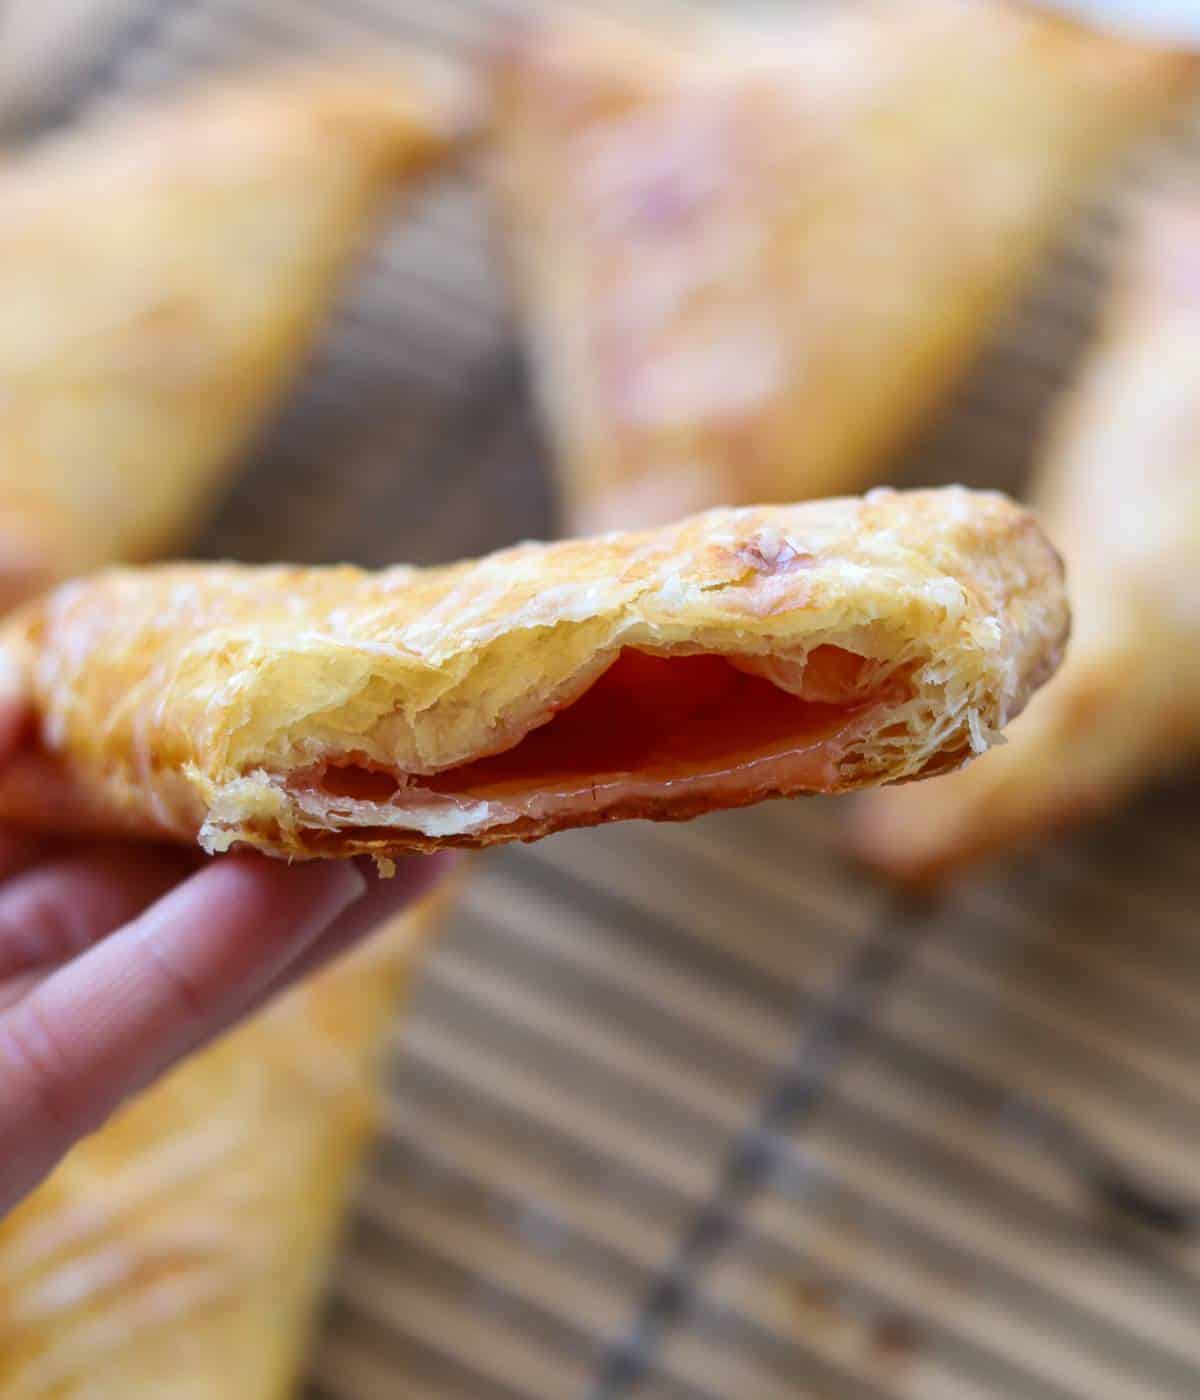 Hand holding pastry with strawberry filling.